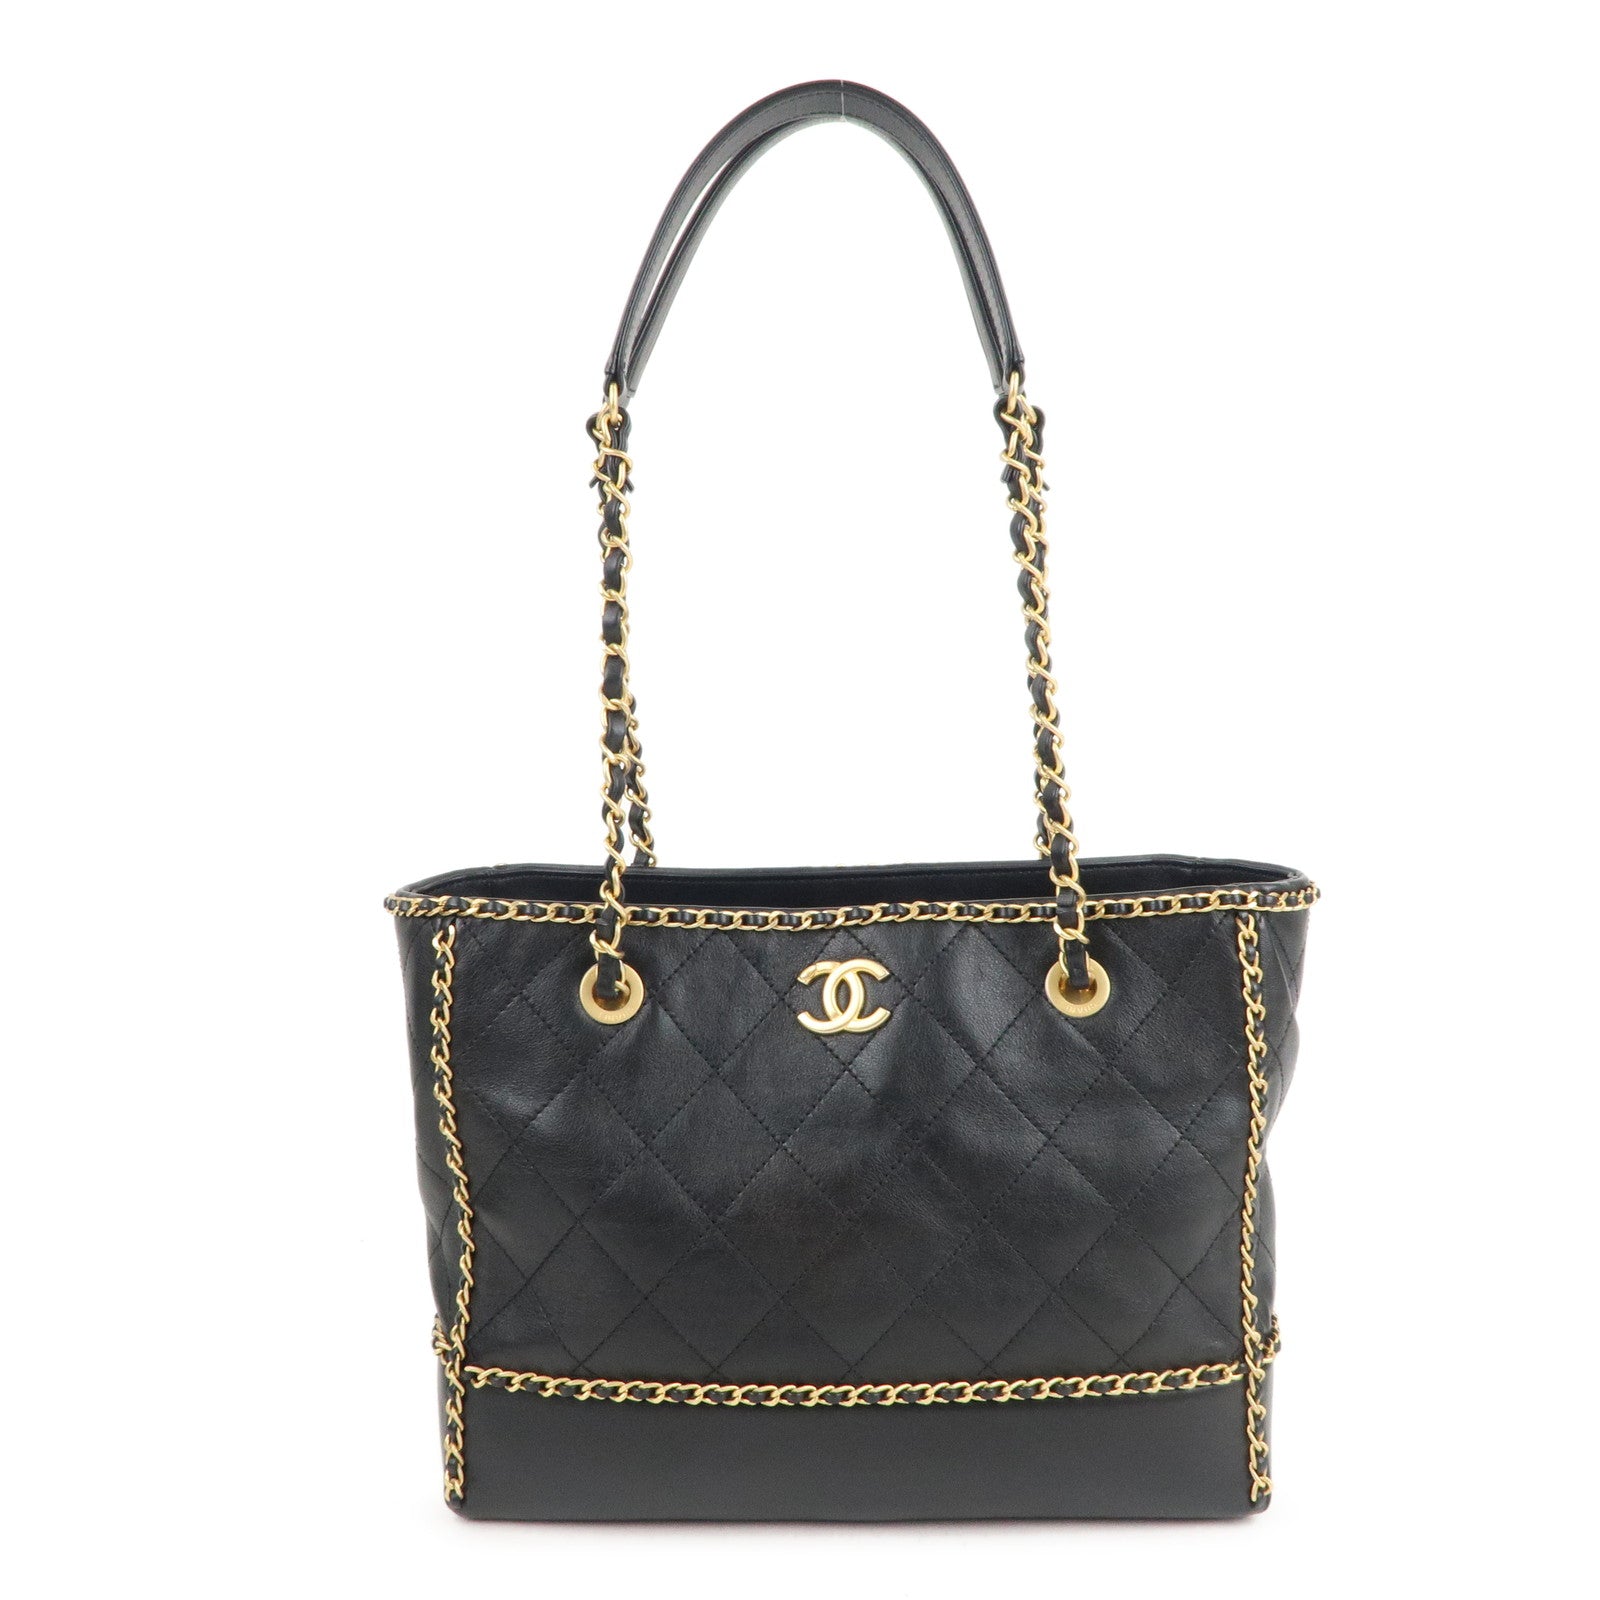 Chanel tote bag gold chain shoulder Matelasse chain bag Black Leather used